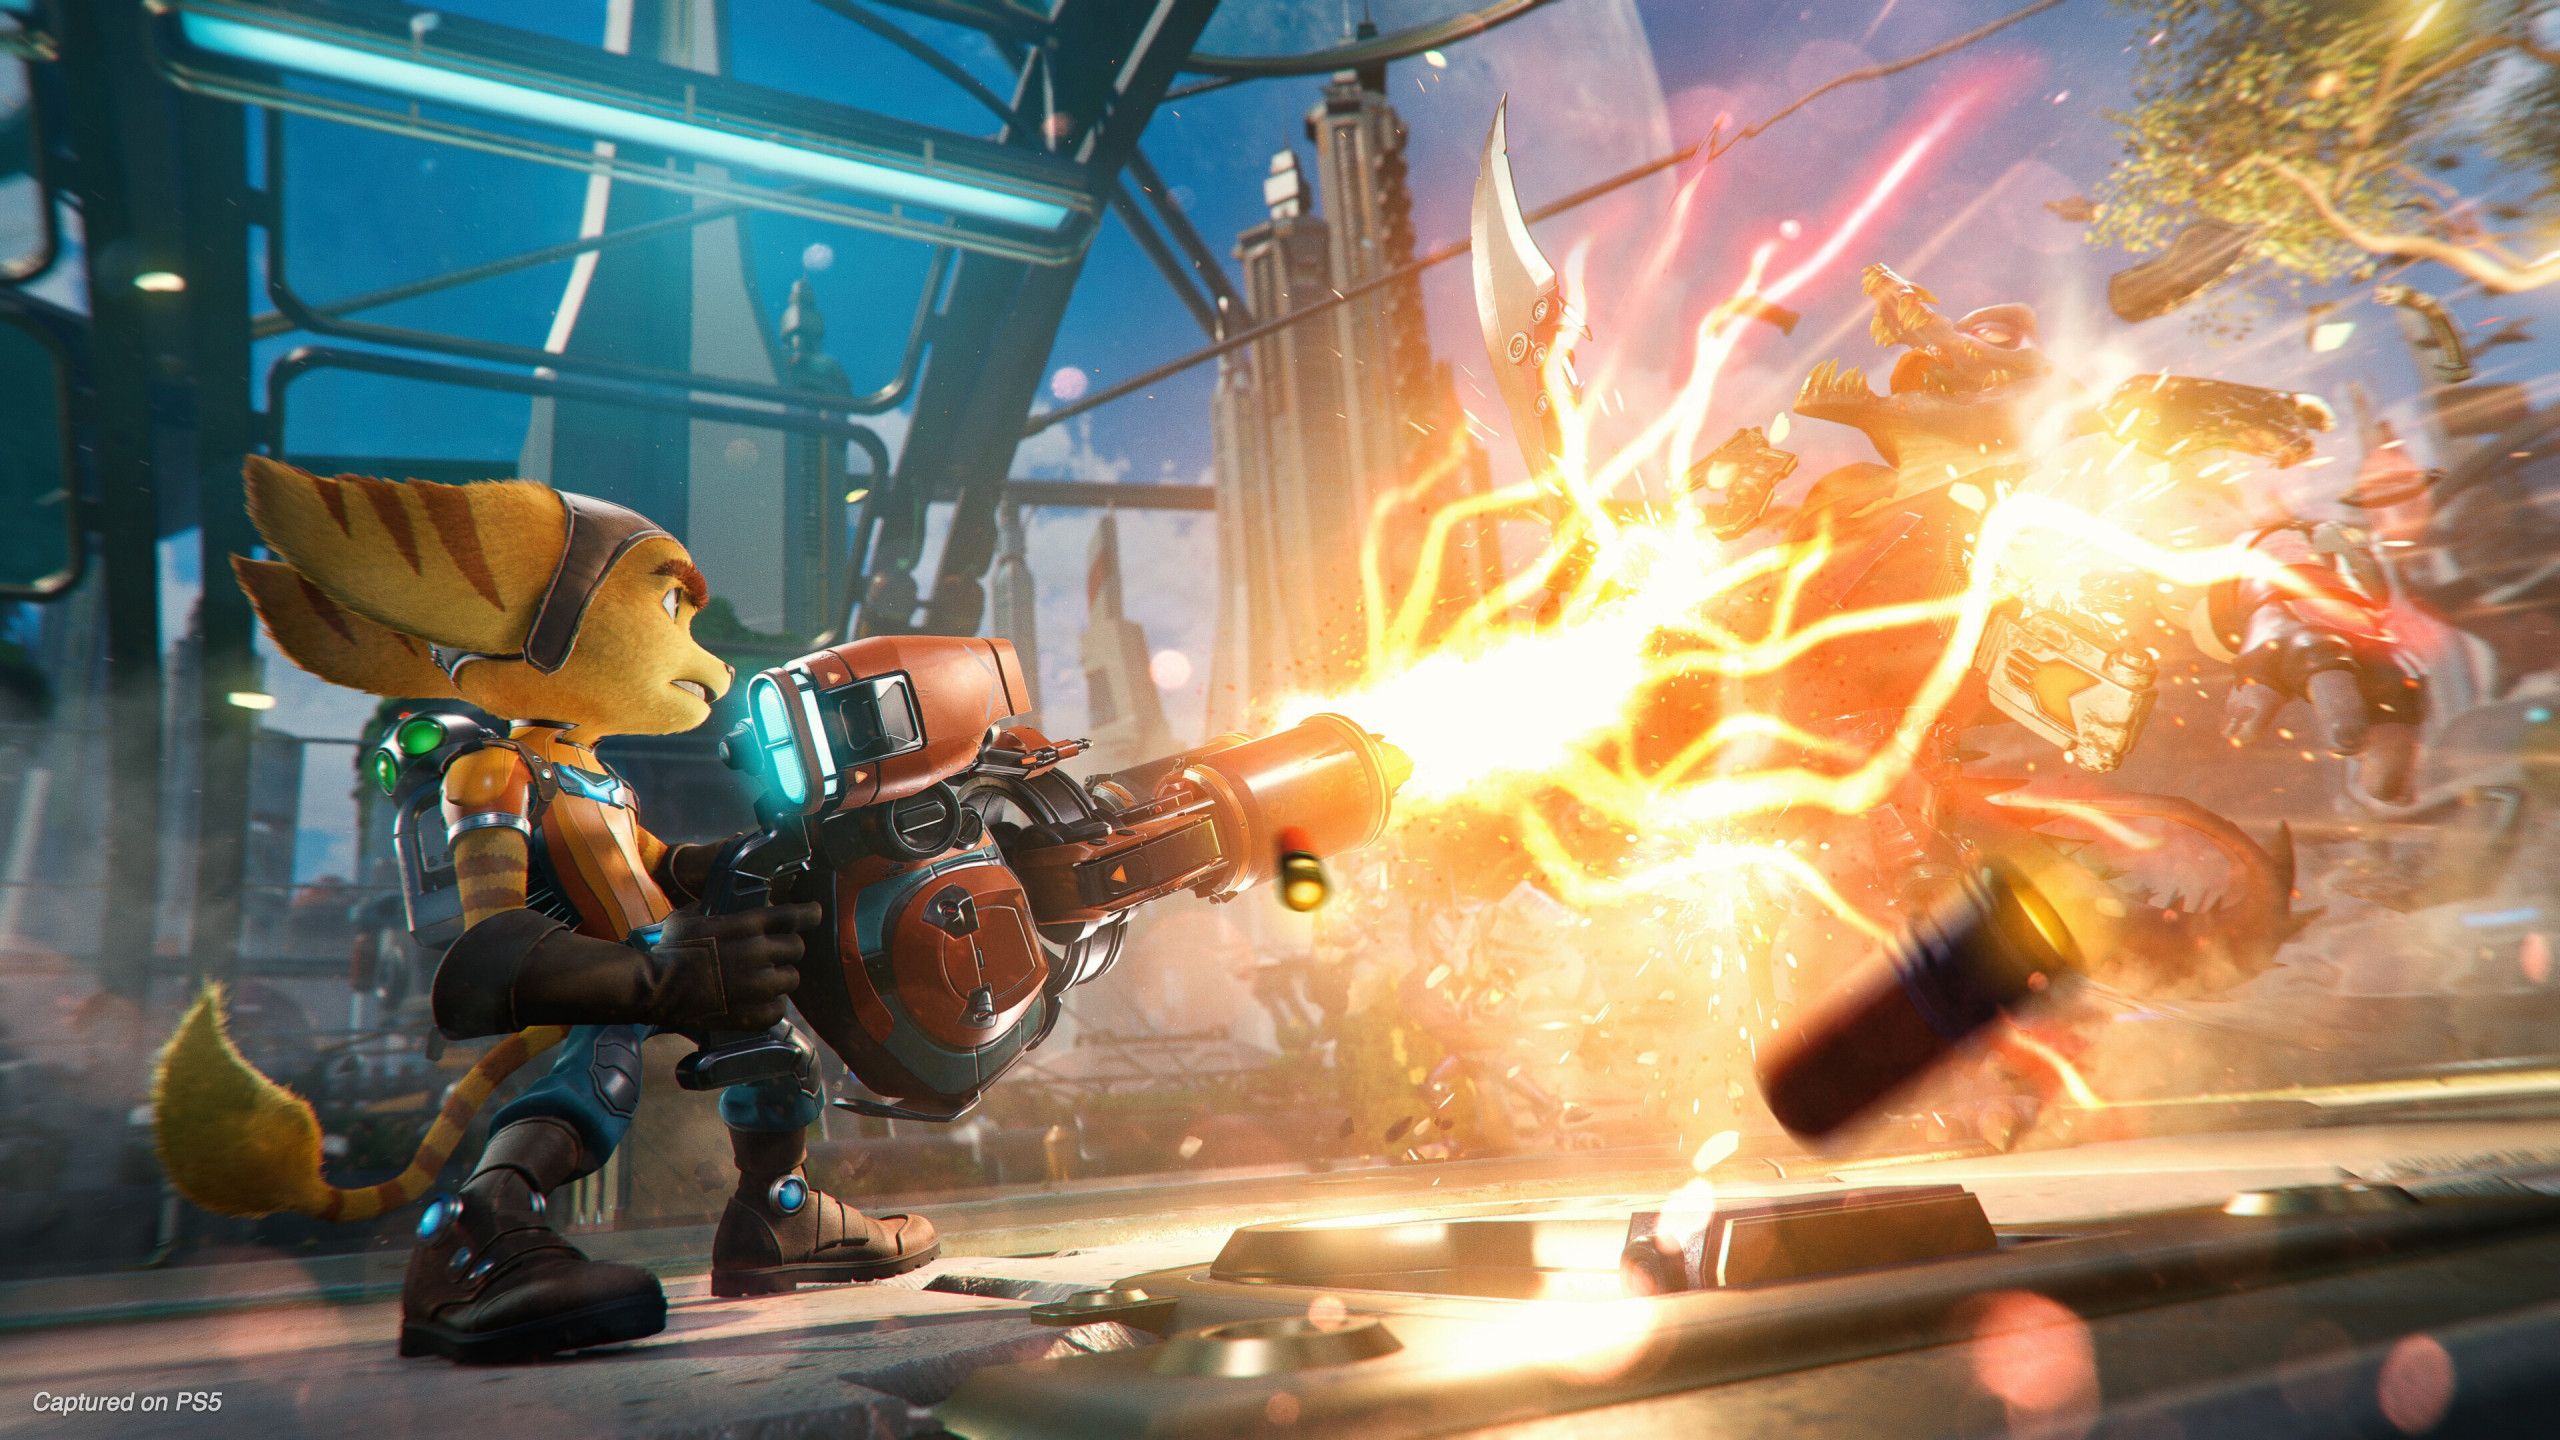 Download wallpaper: Ratchet and Clank: Rift Apart 2560x1440